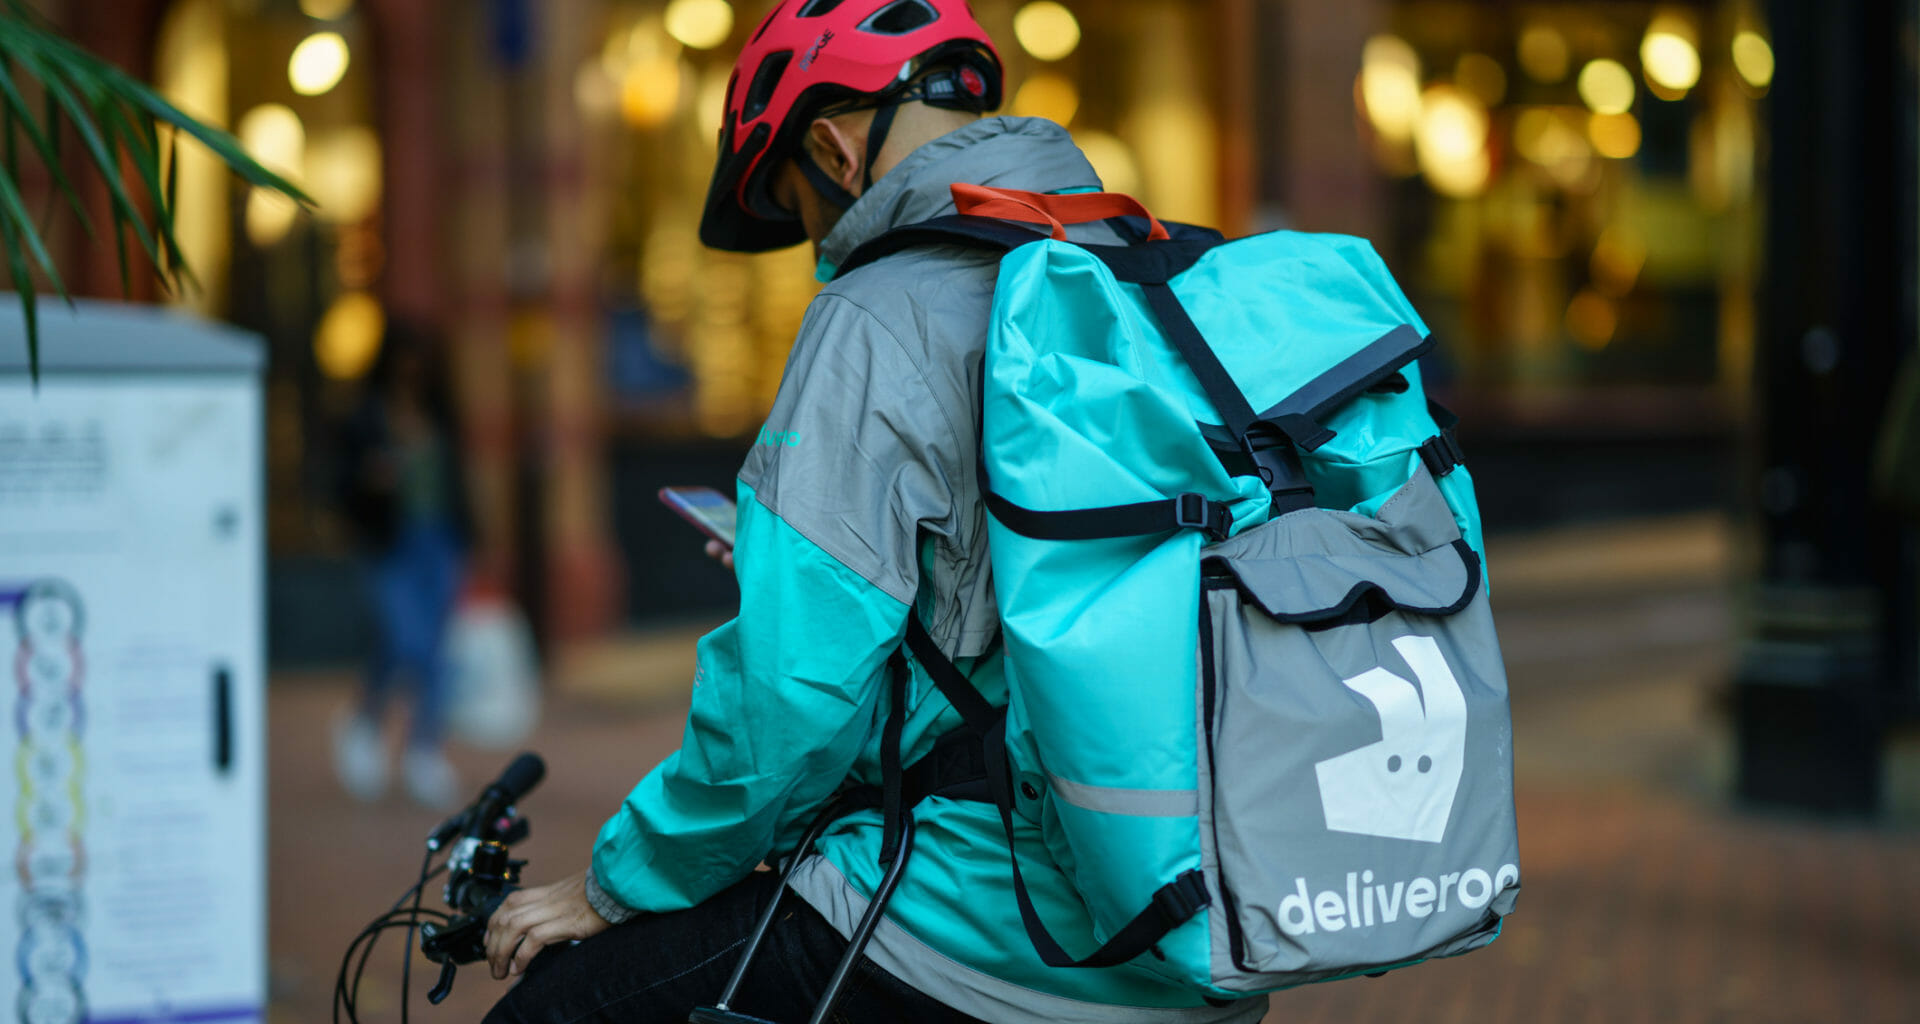 Food delivery firms must address rider safety concerns, say campaigners 1